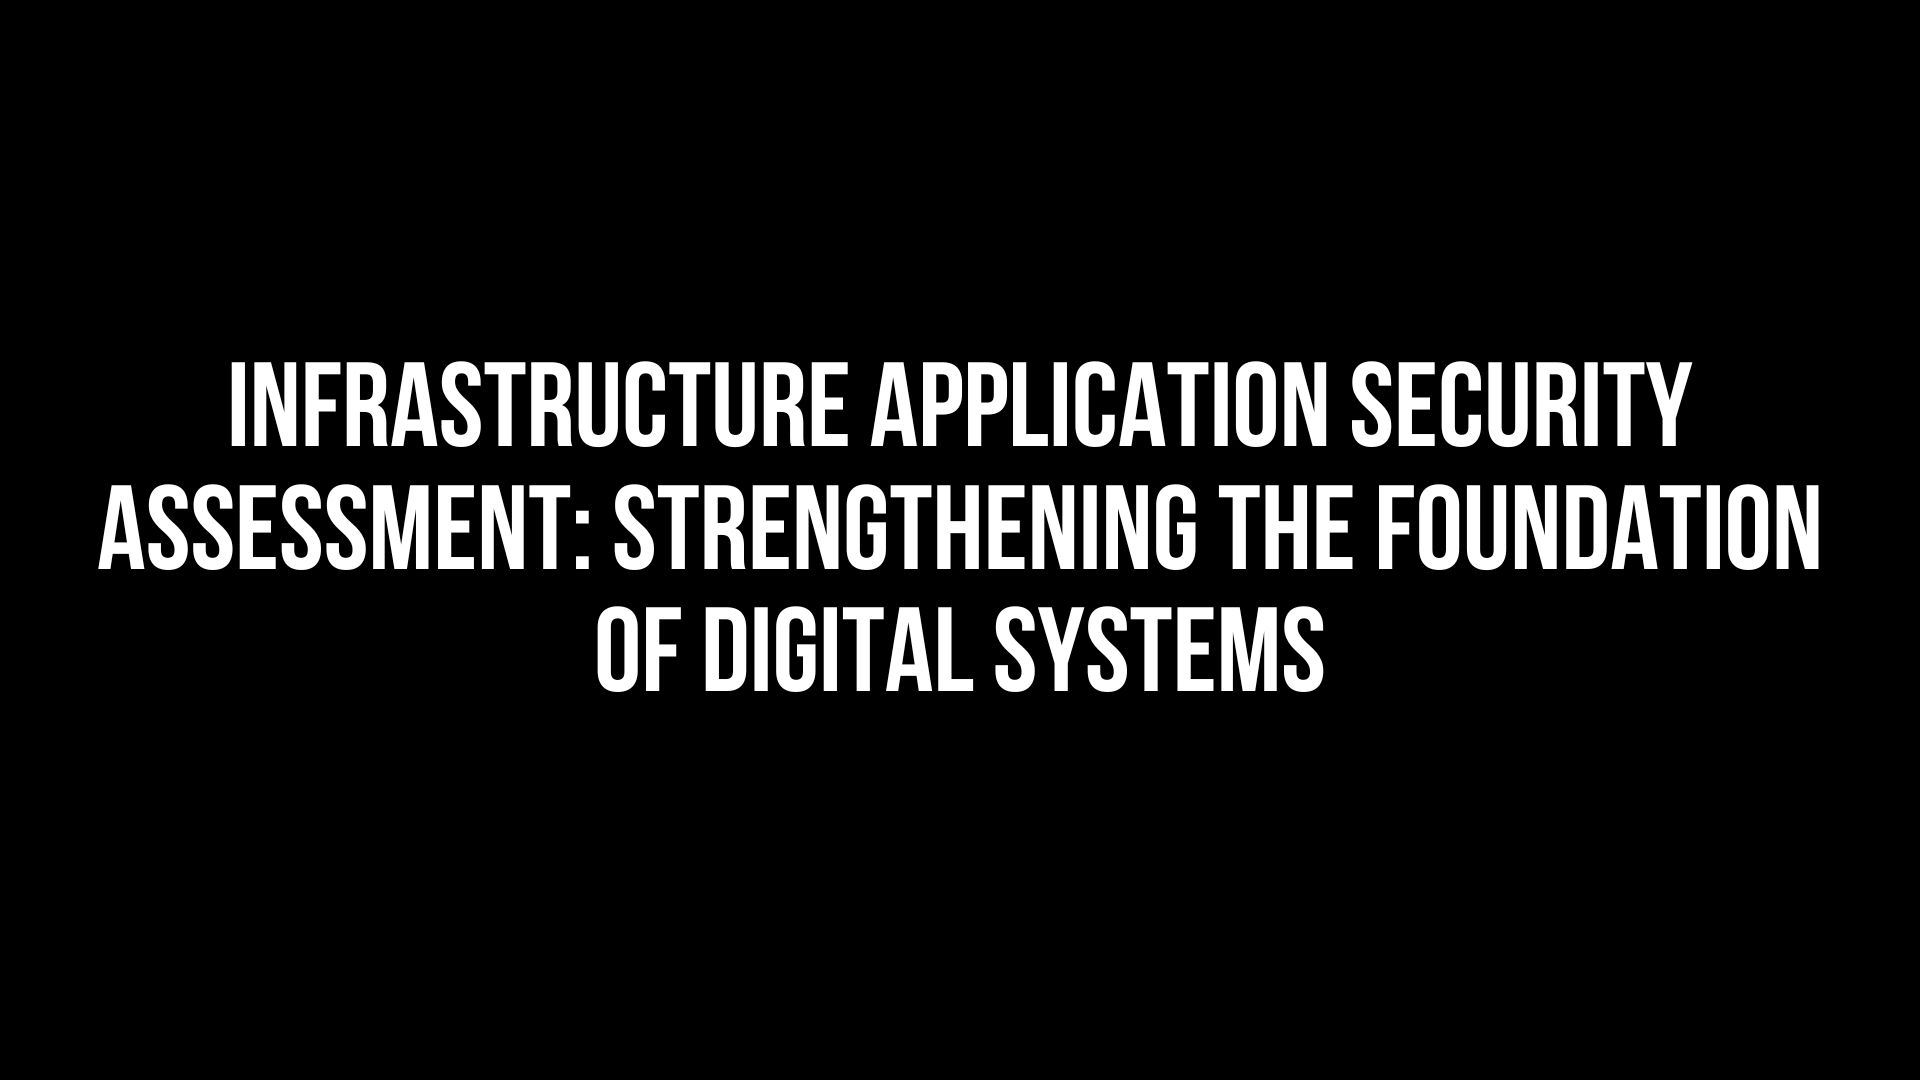 Infrastructure Application Security Assessment Strengthening the Foundation of Digital Systems